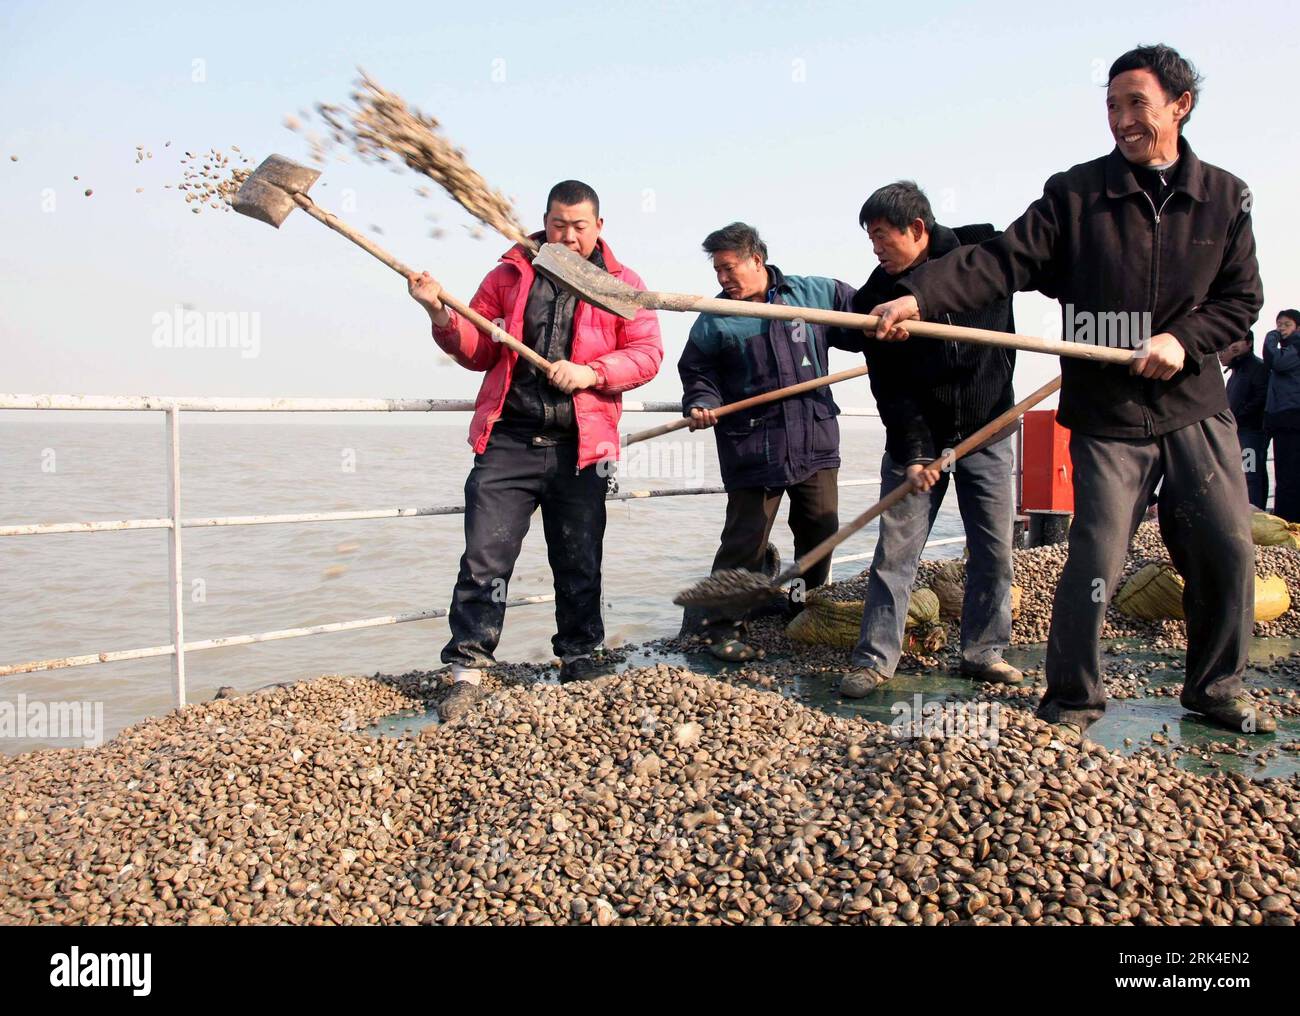 Bildnummer: 53620449  Datum: 22.11.2009  Copyright: imago/Xinhua (091123) -- LIANYUNGANG, Nov. 23, 2009 (Xinhua) -- Staff workers shovel the seashell animals into the sea during an activity of marine shell animals breeding through releasing into the sea, at the Haizhoubay Fishery Ground in Lianyungang, east China s Jiangsu Province, Nov. 22, 2009. A total of 42.8 tons of cash seashell, among them short necked clam, Cyclina Sinesis Gmelin, Mercenaria Linnaeus, and scapharca subcrenata, are released into the sea for natural reproduction in this winter which is billed as being conducive to amelio Stock Photo